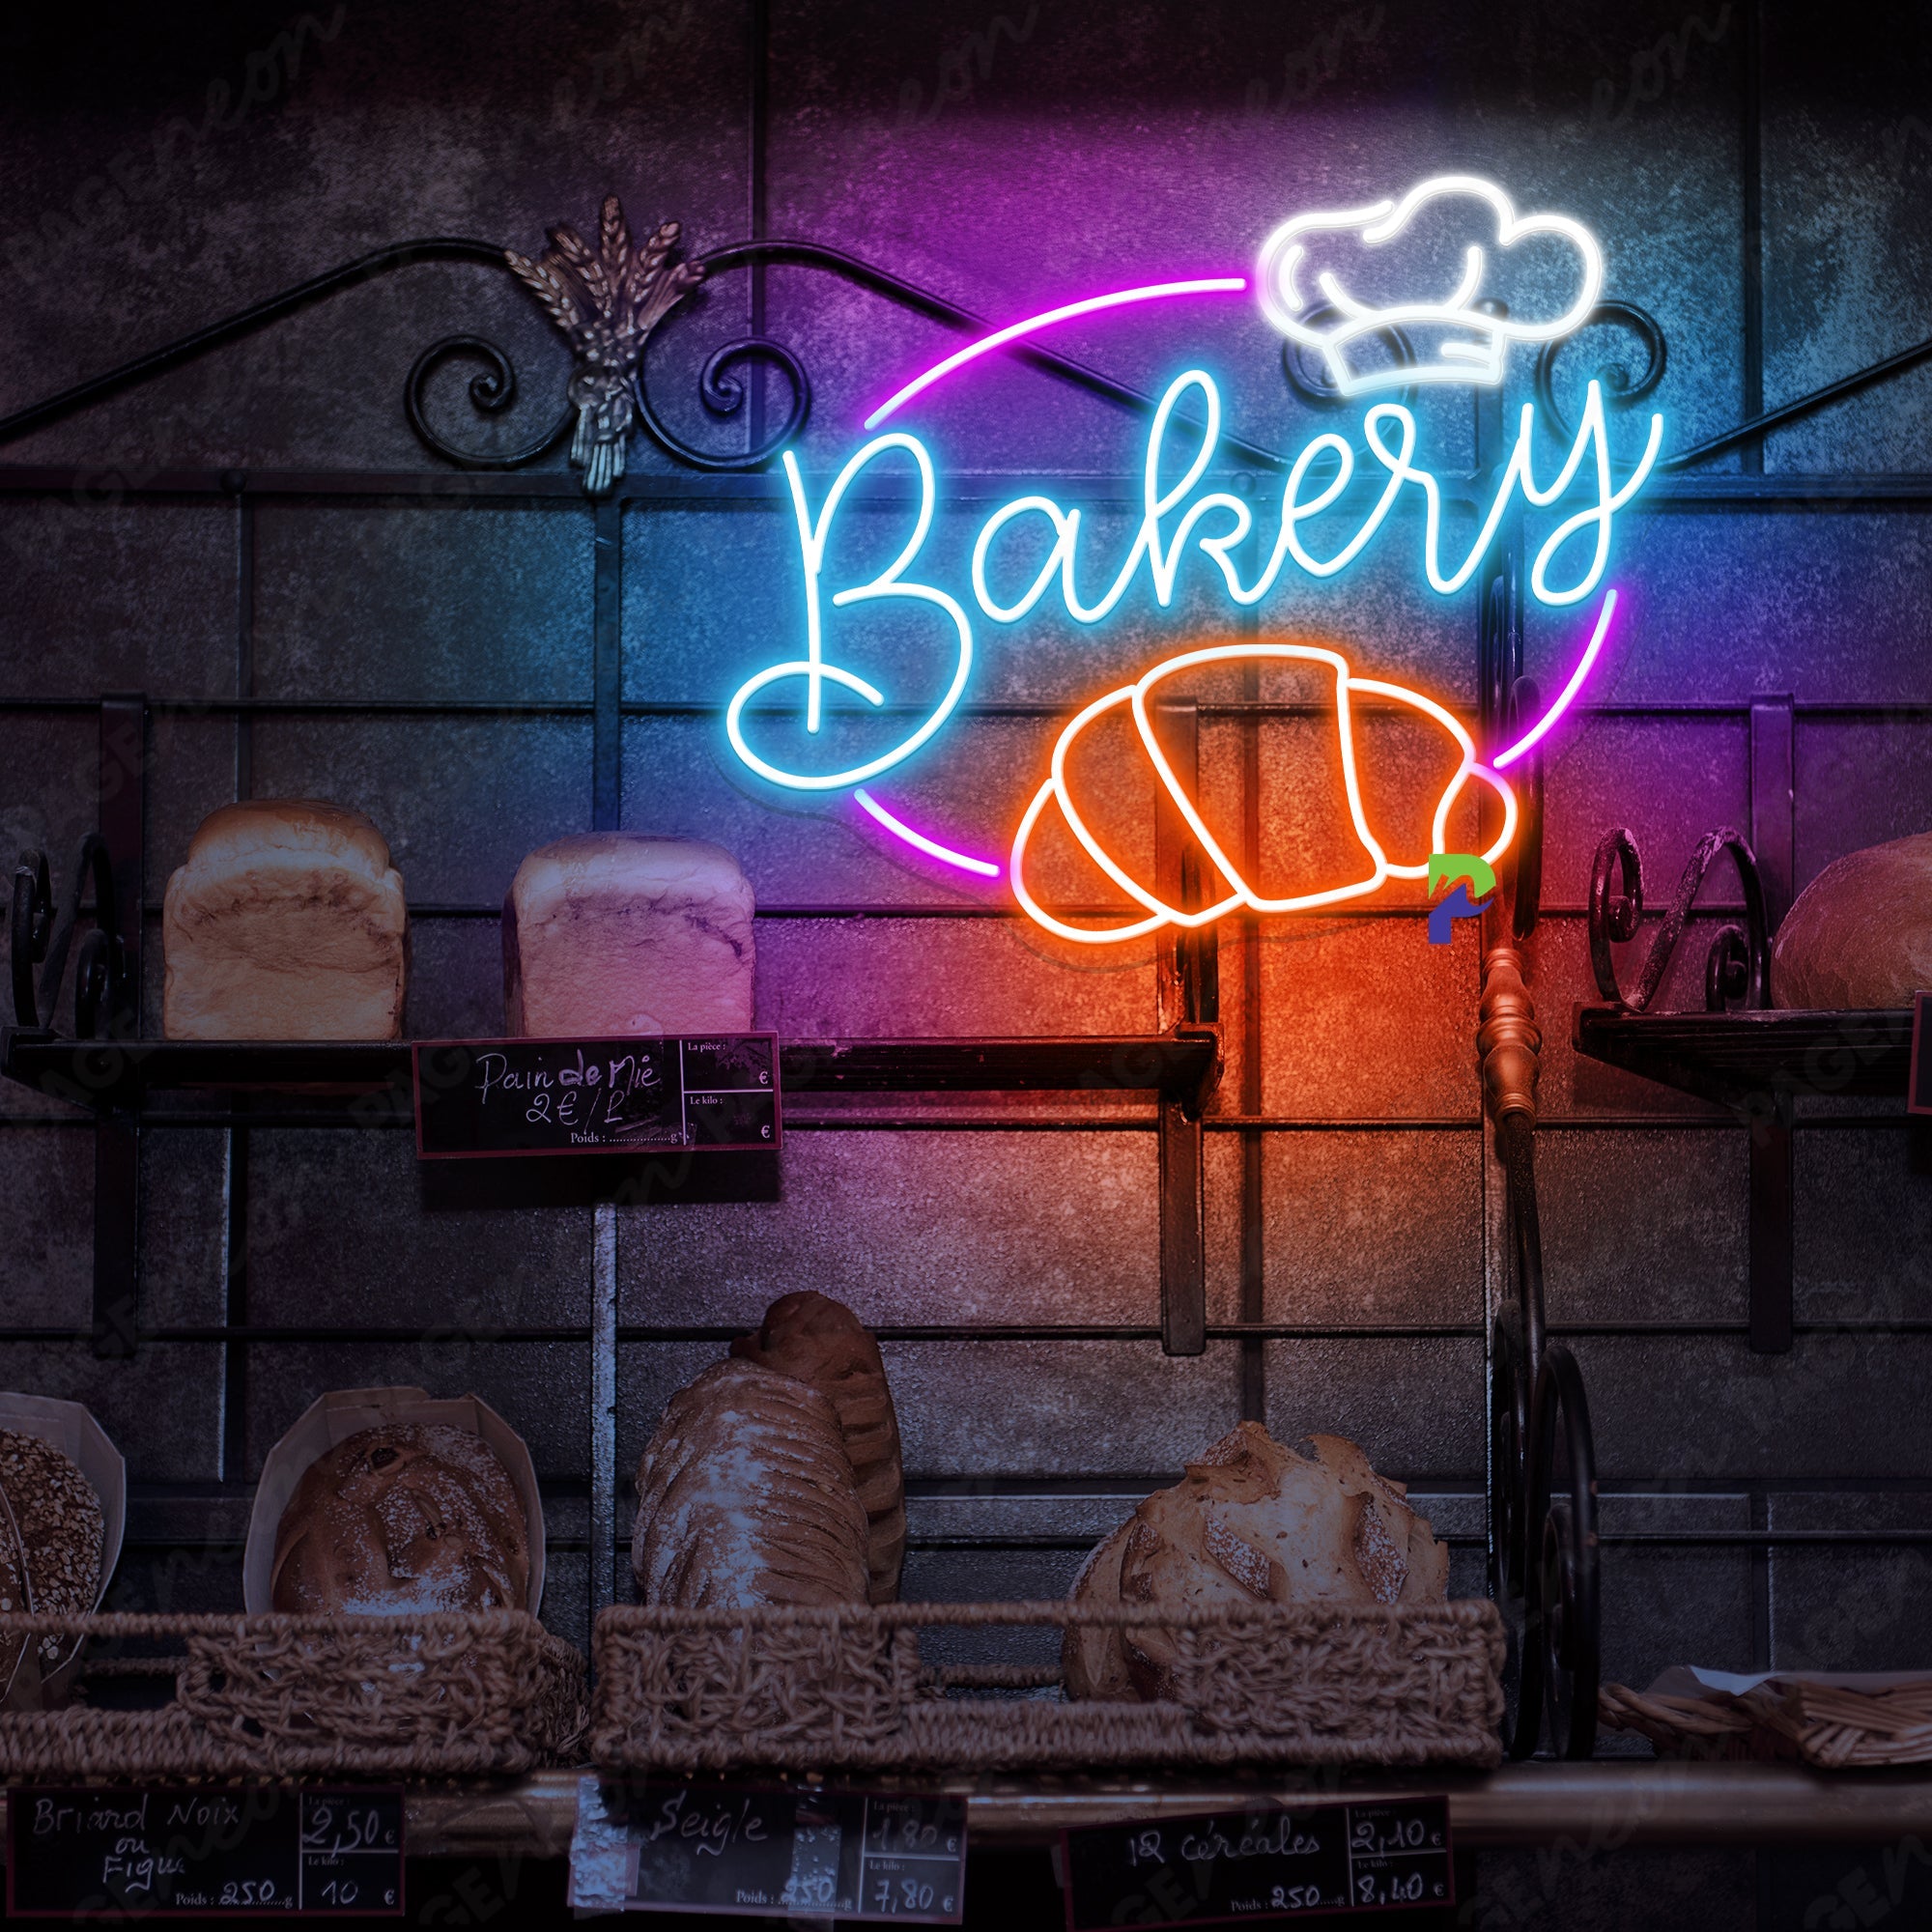 Neon Bakery Signs Croissant Bread Led Light